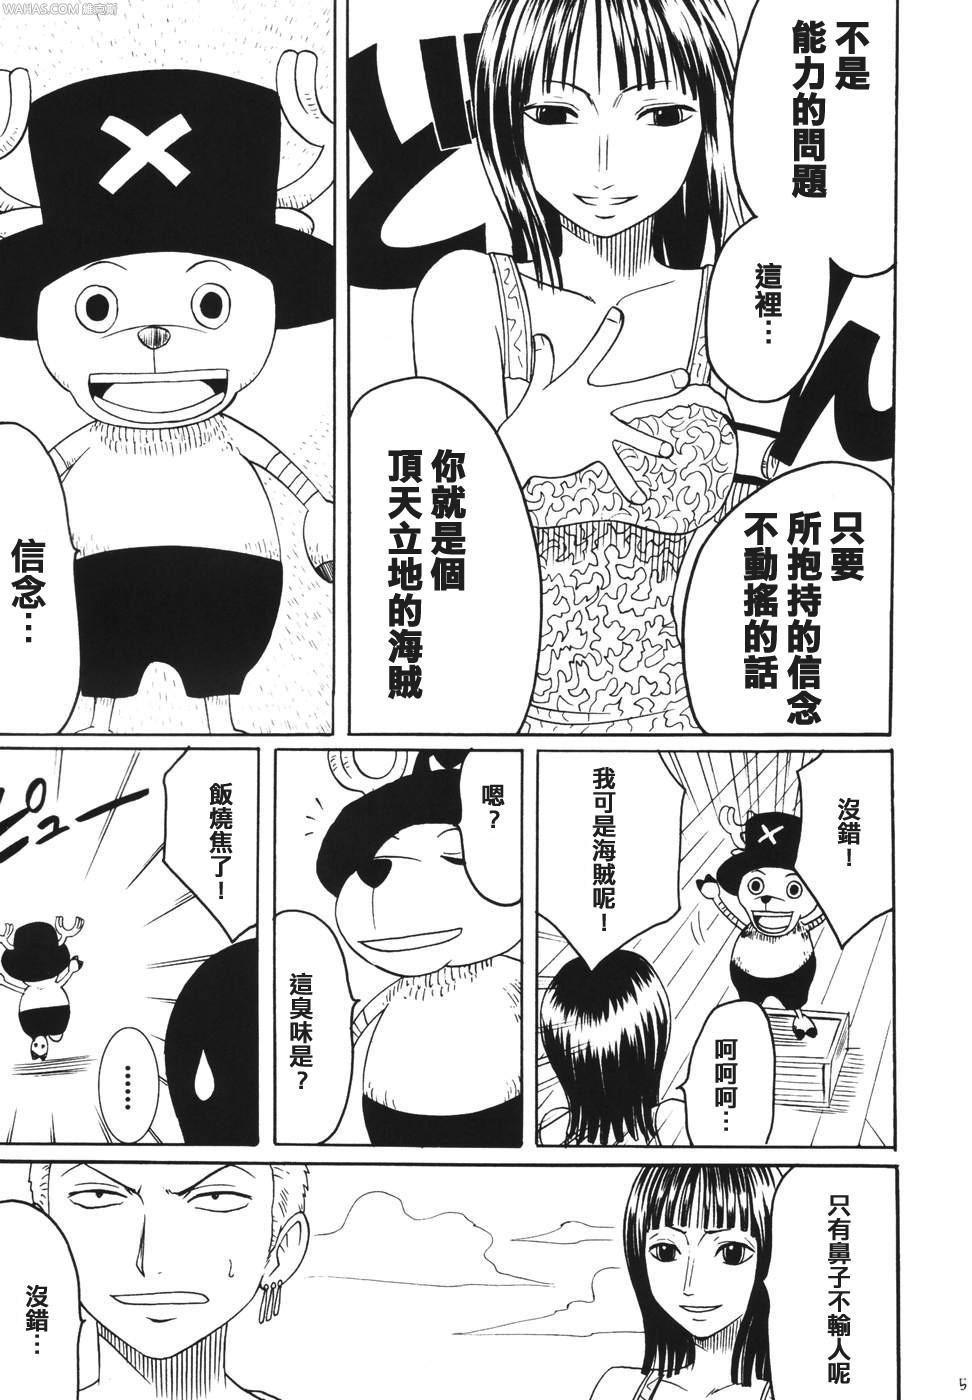 Mexicano Dancing Animation Run - One piece Pure18 - Page 4